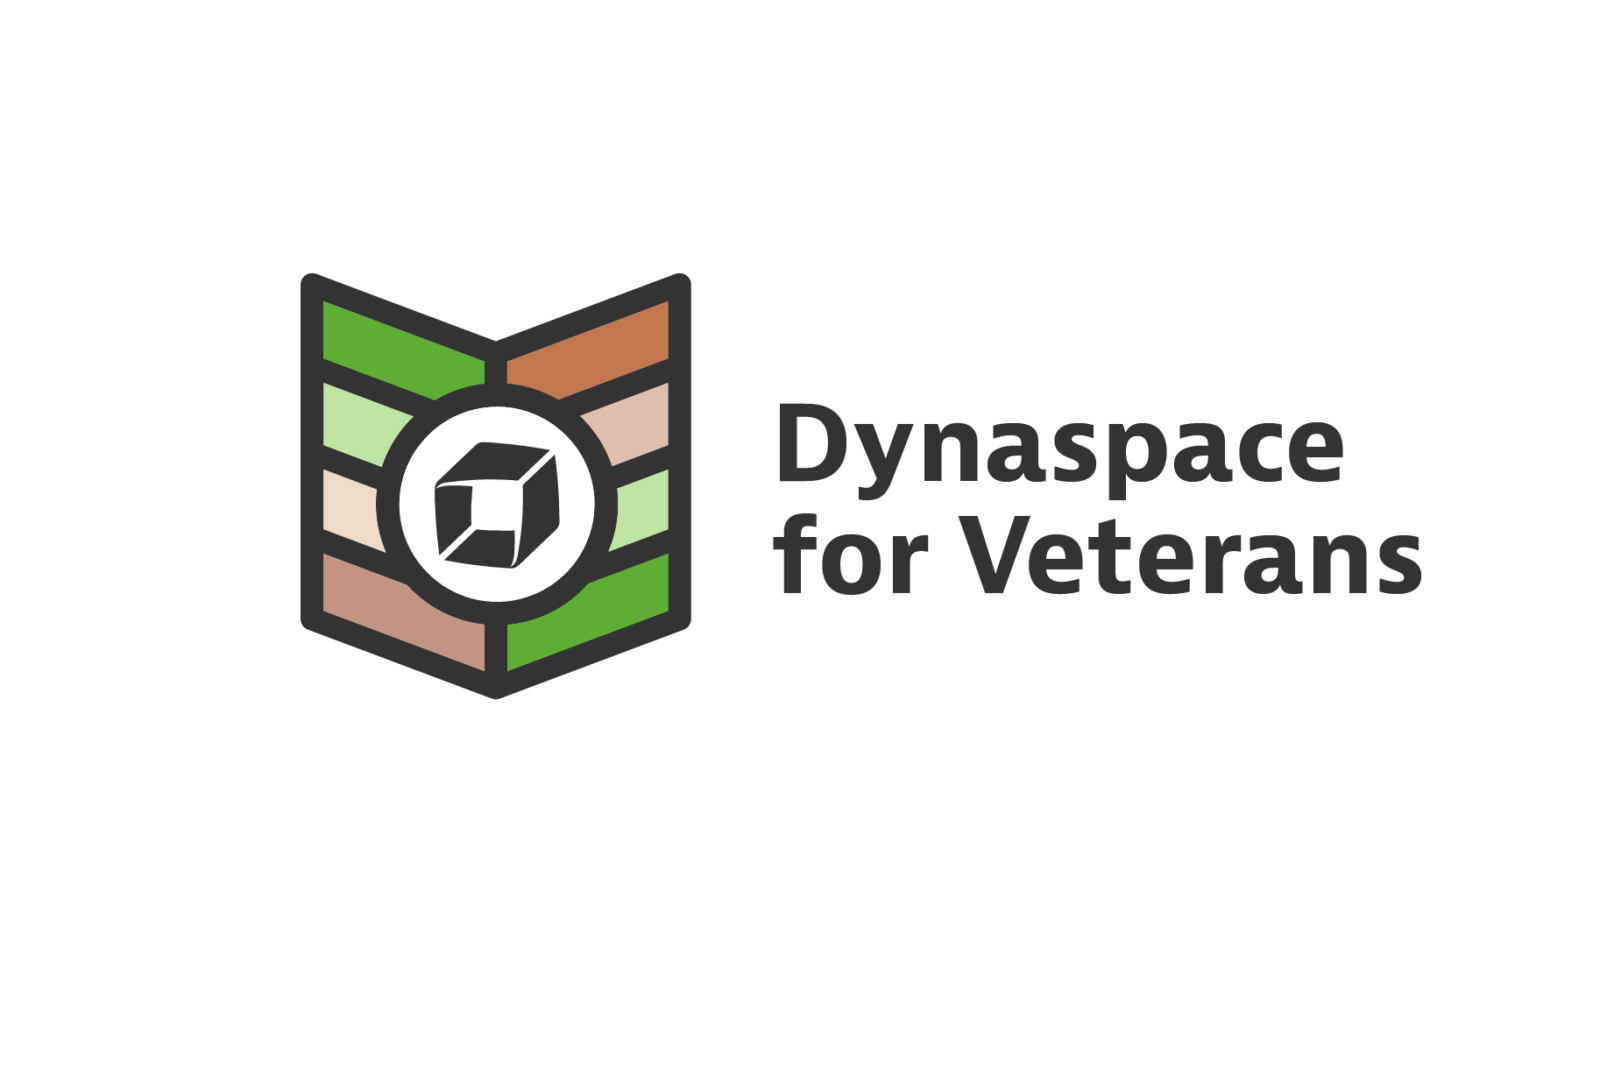 Dynaspace for Veterans